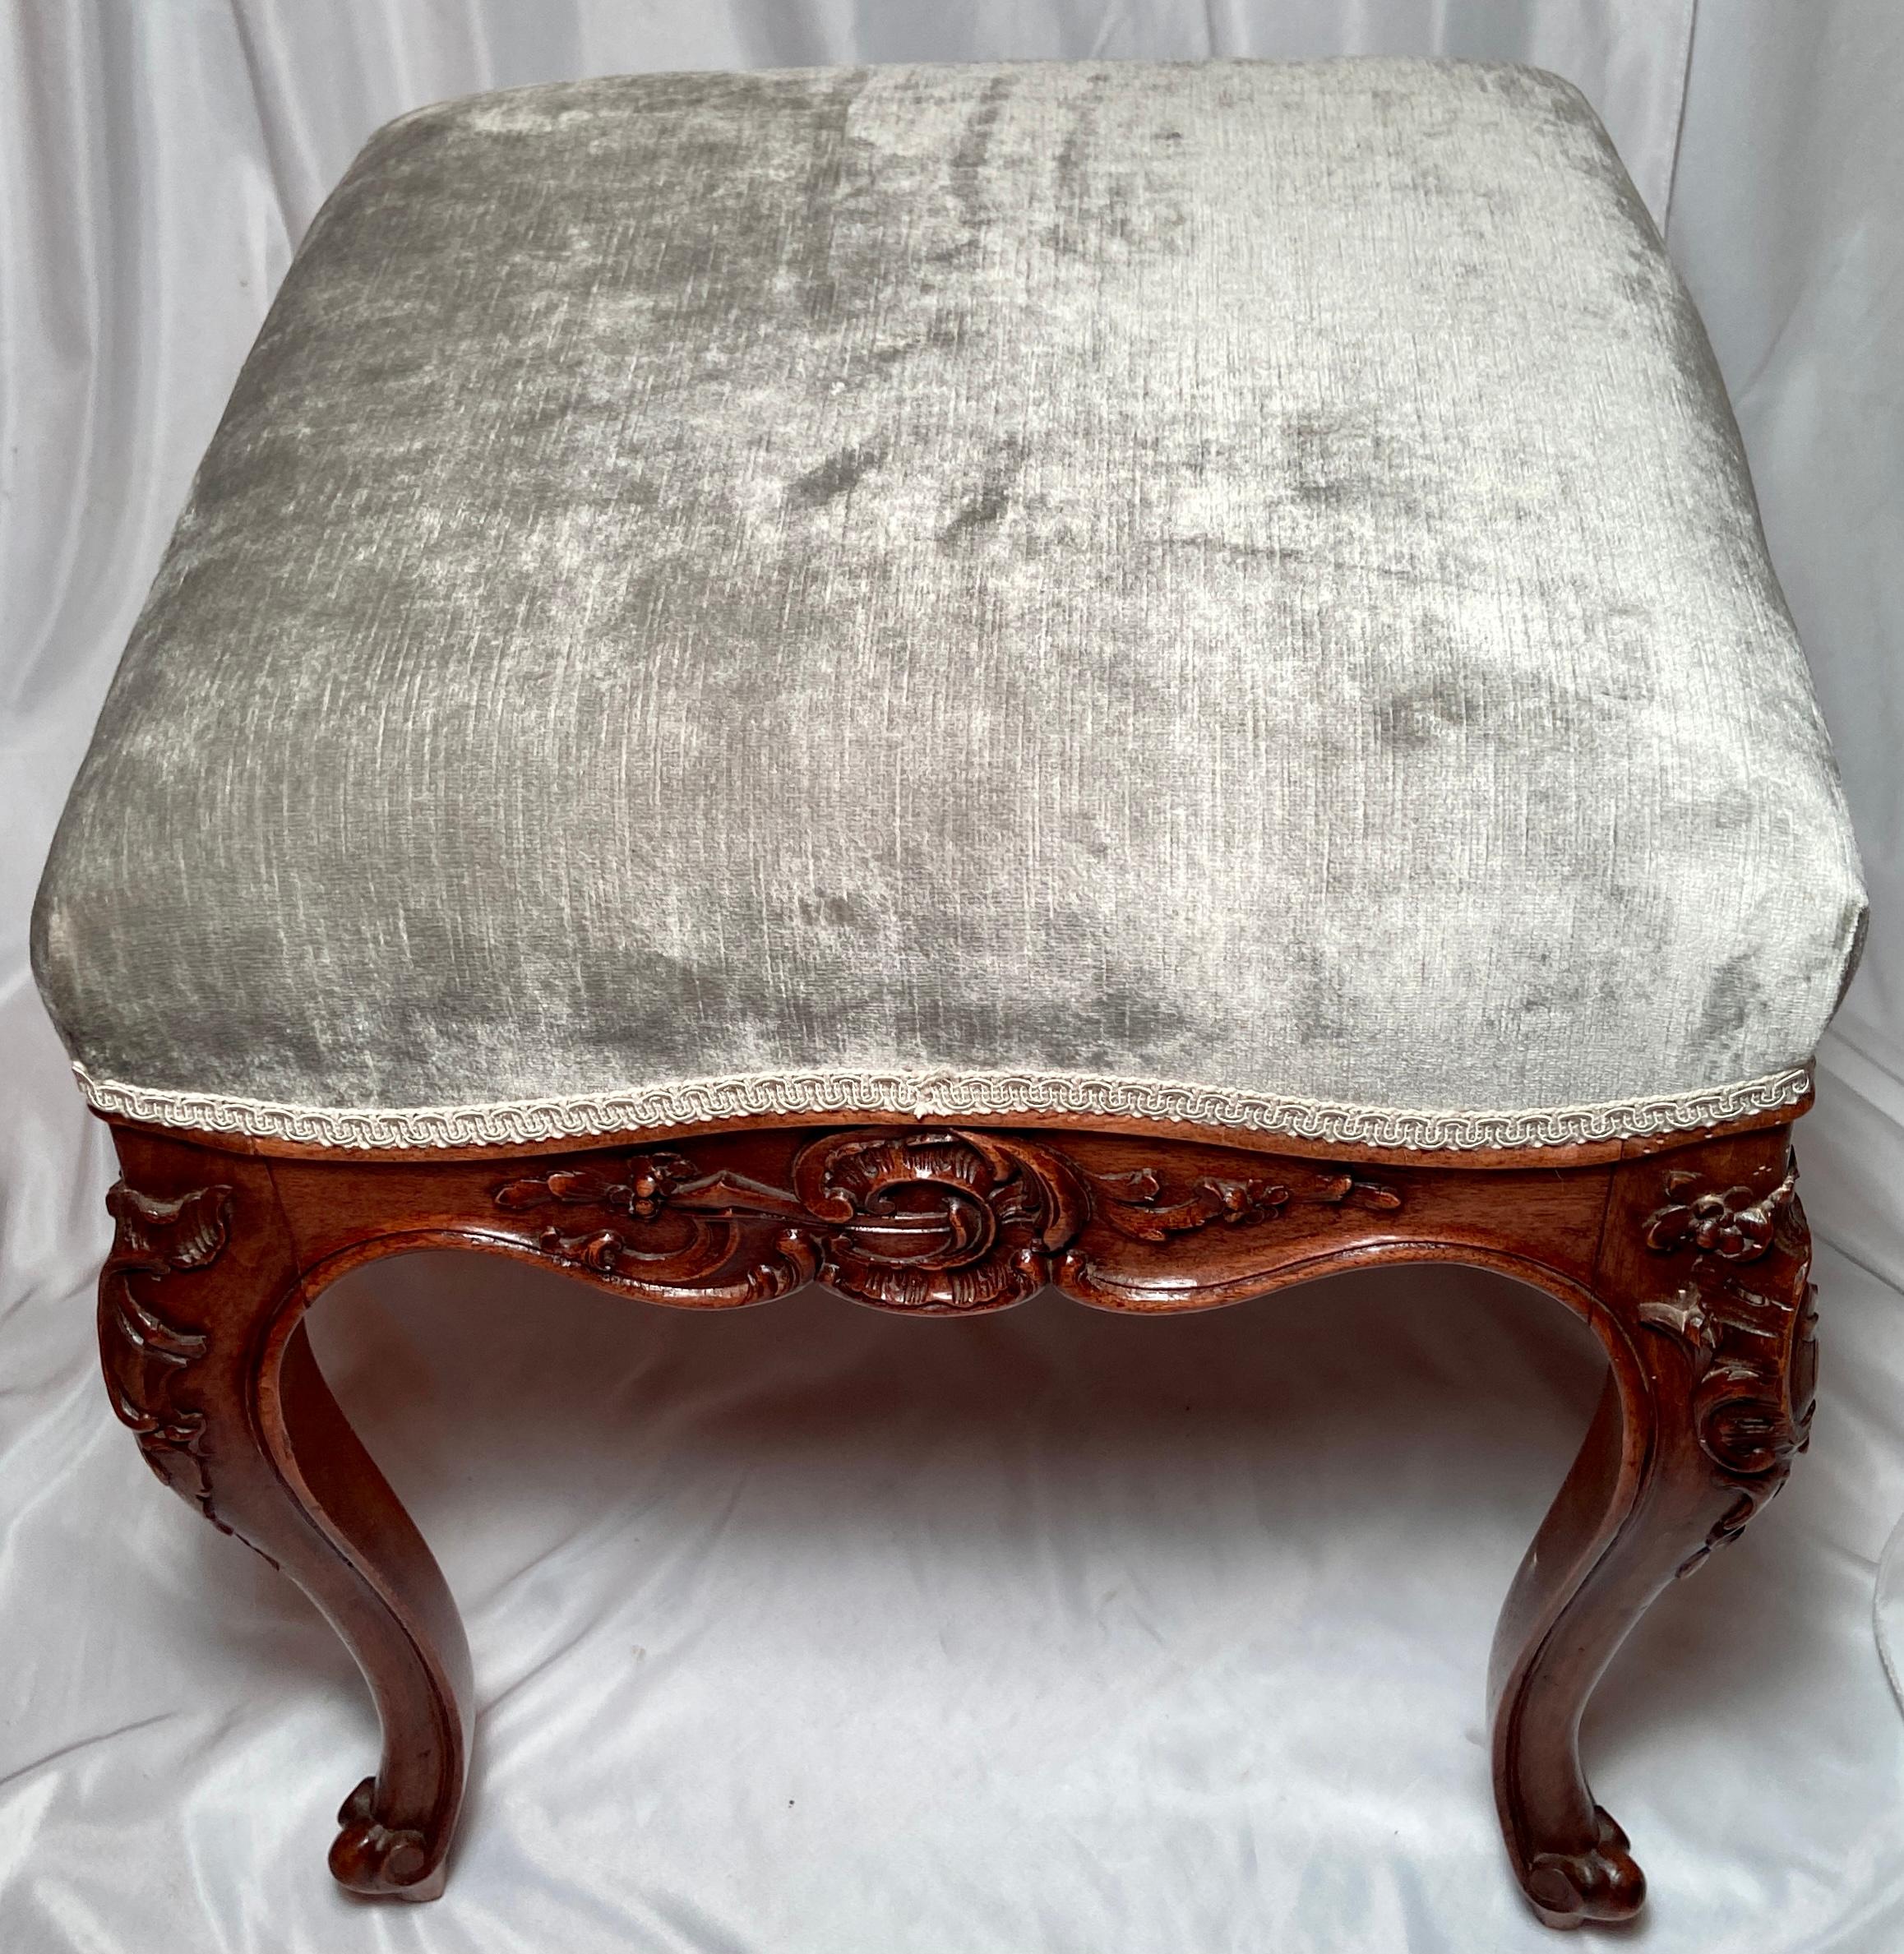 Antique 19th century French carved walnut bench with new upholstery.
There are 2 of these available, each sold individually.